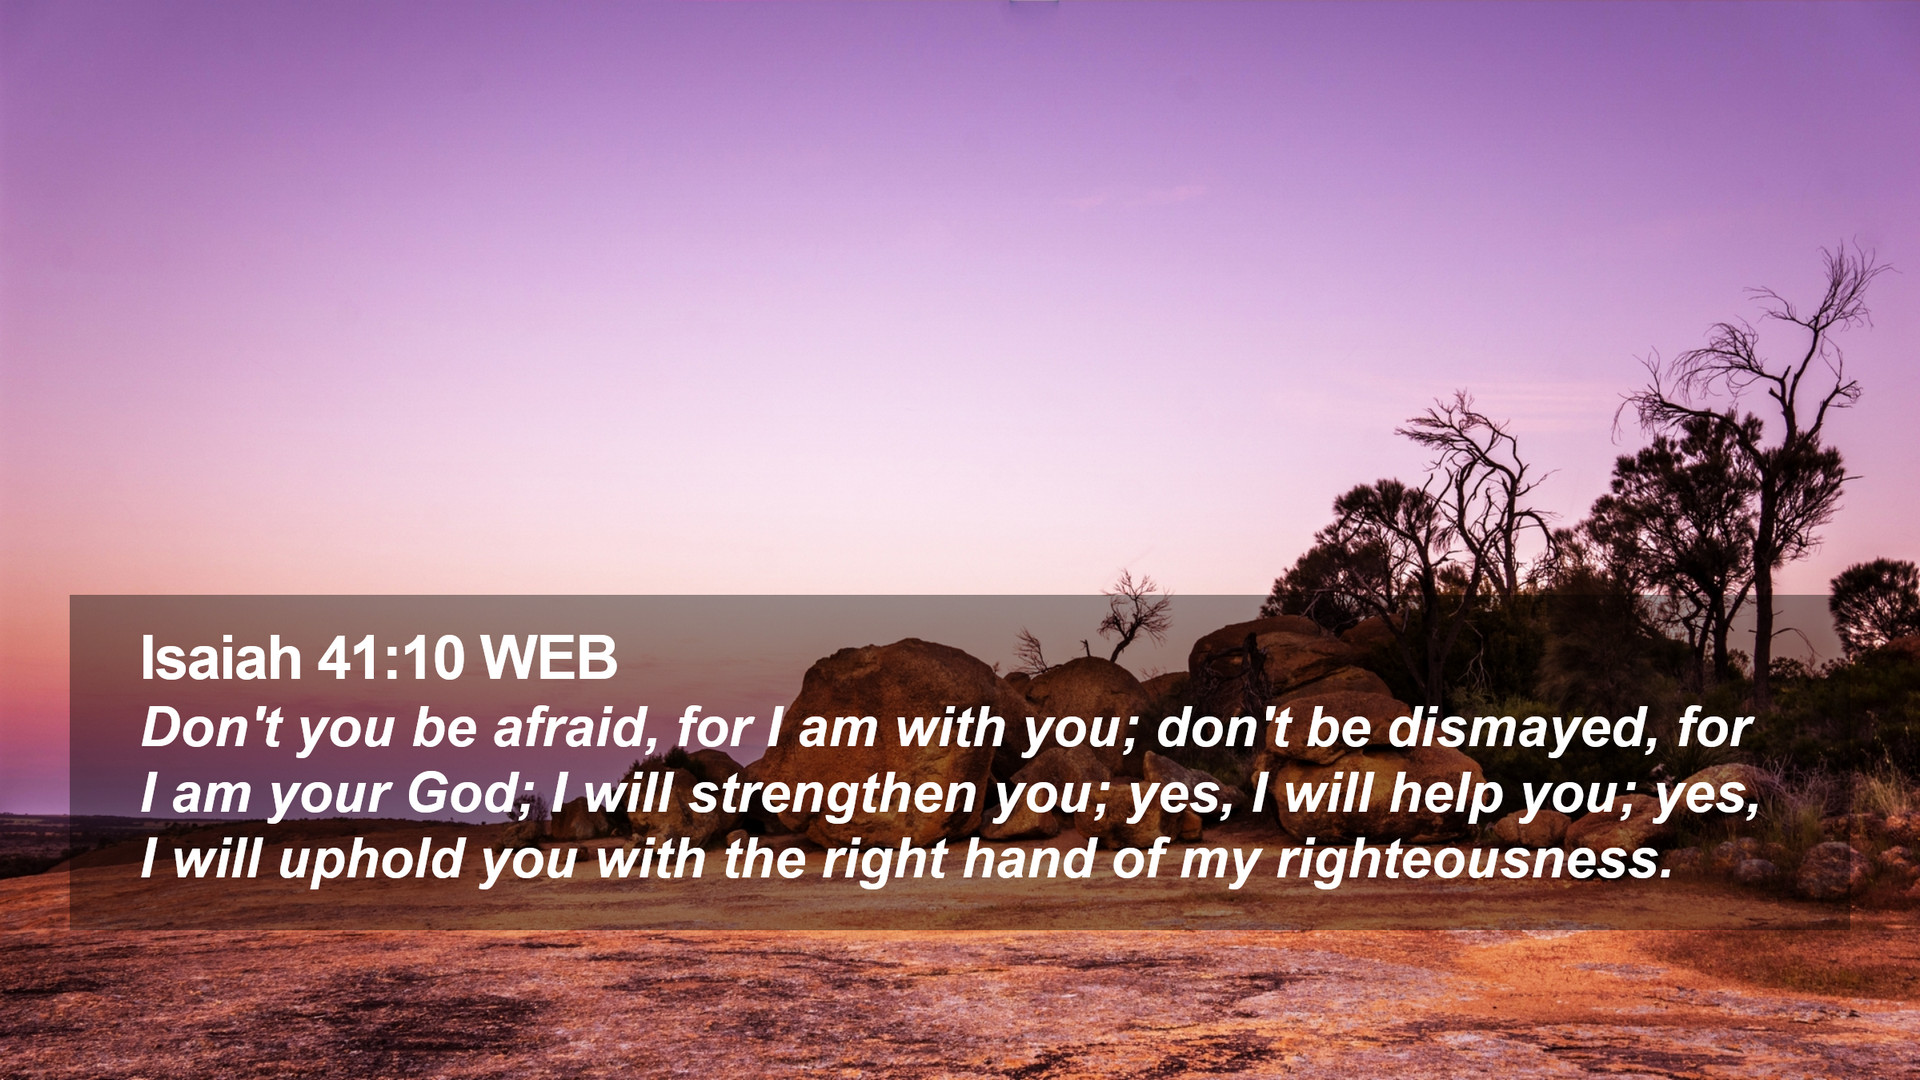 Isaiah 41:10 WEB Desktop Wallpaper't you be afraid, for I am with you; don't be